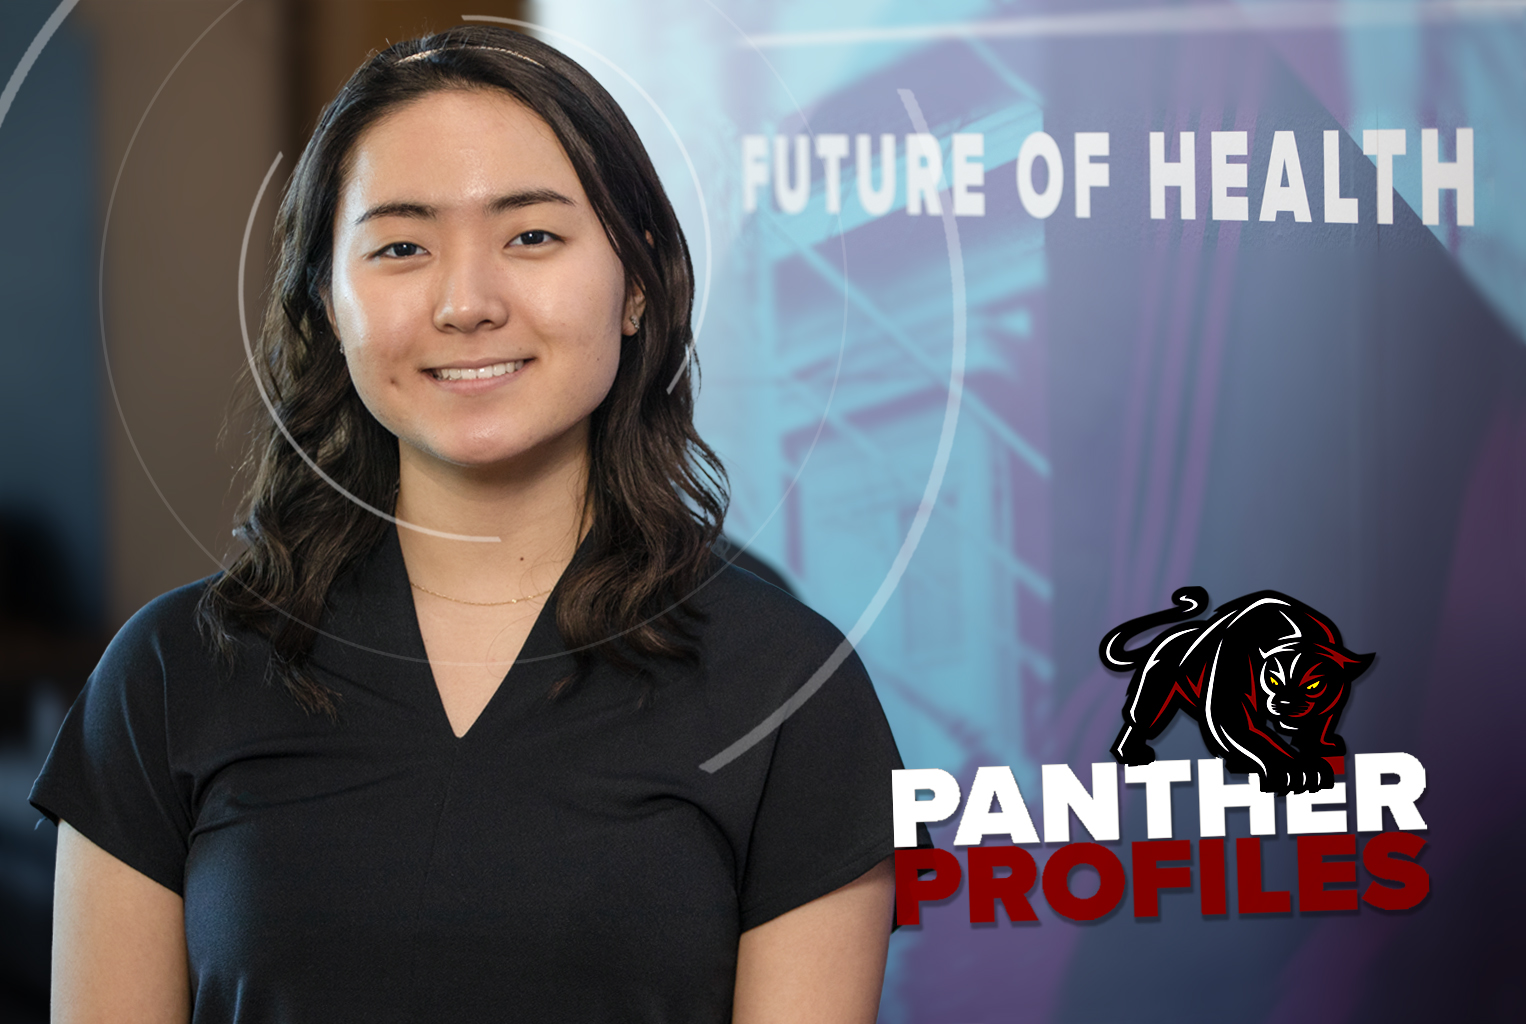 Pharmacy Student SeHan Jeong in a Panther Profile frame